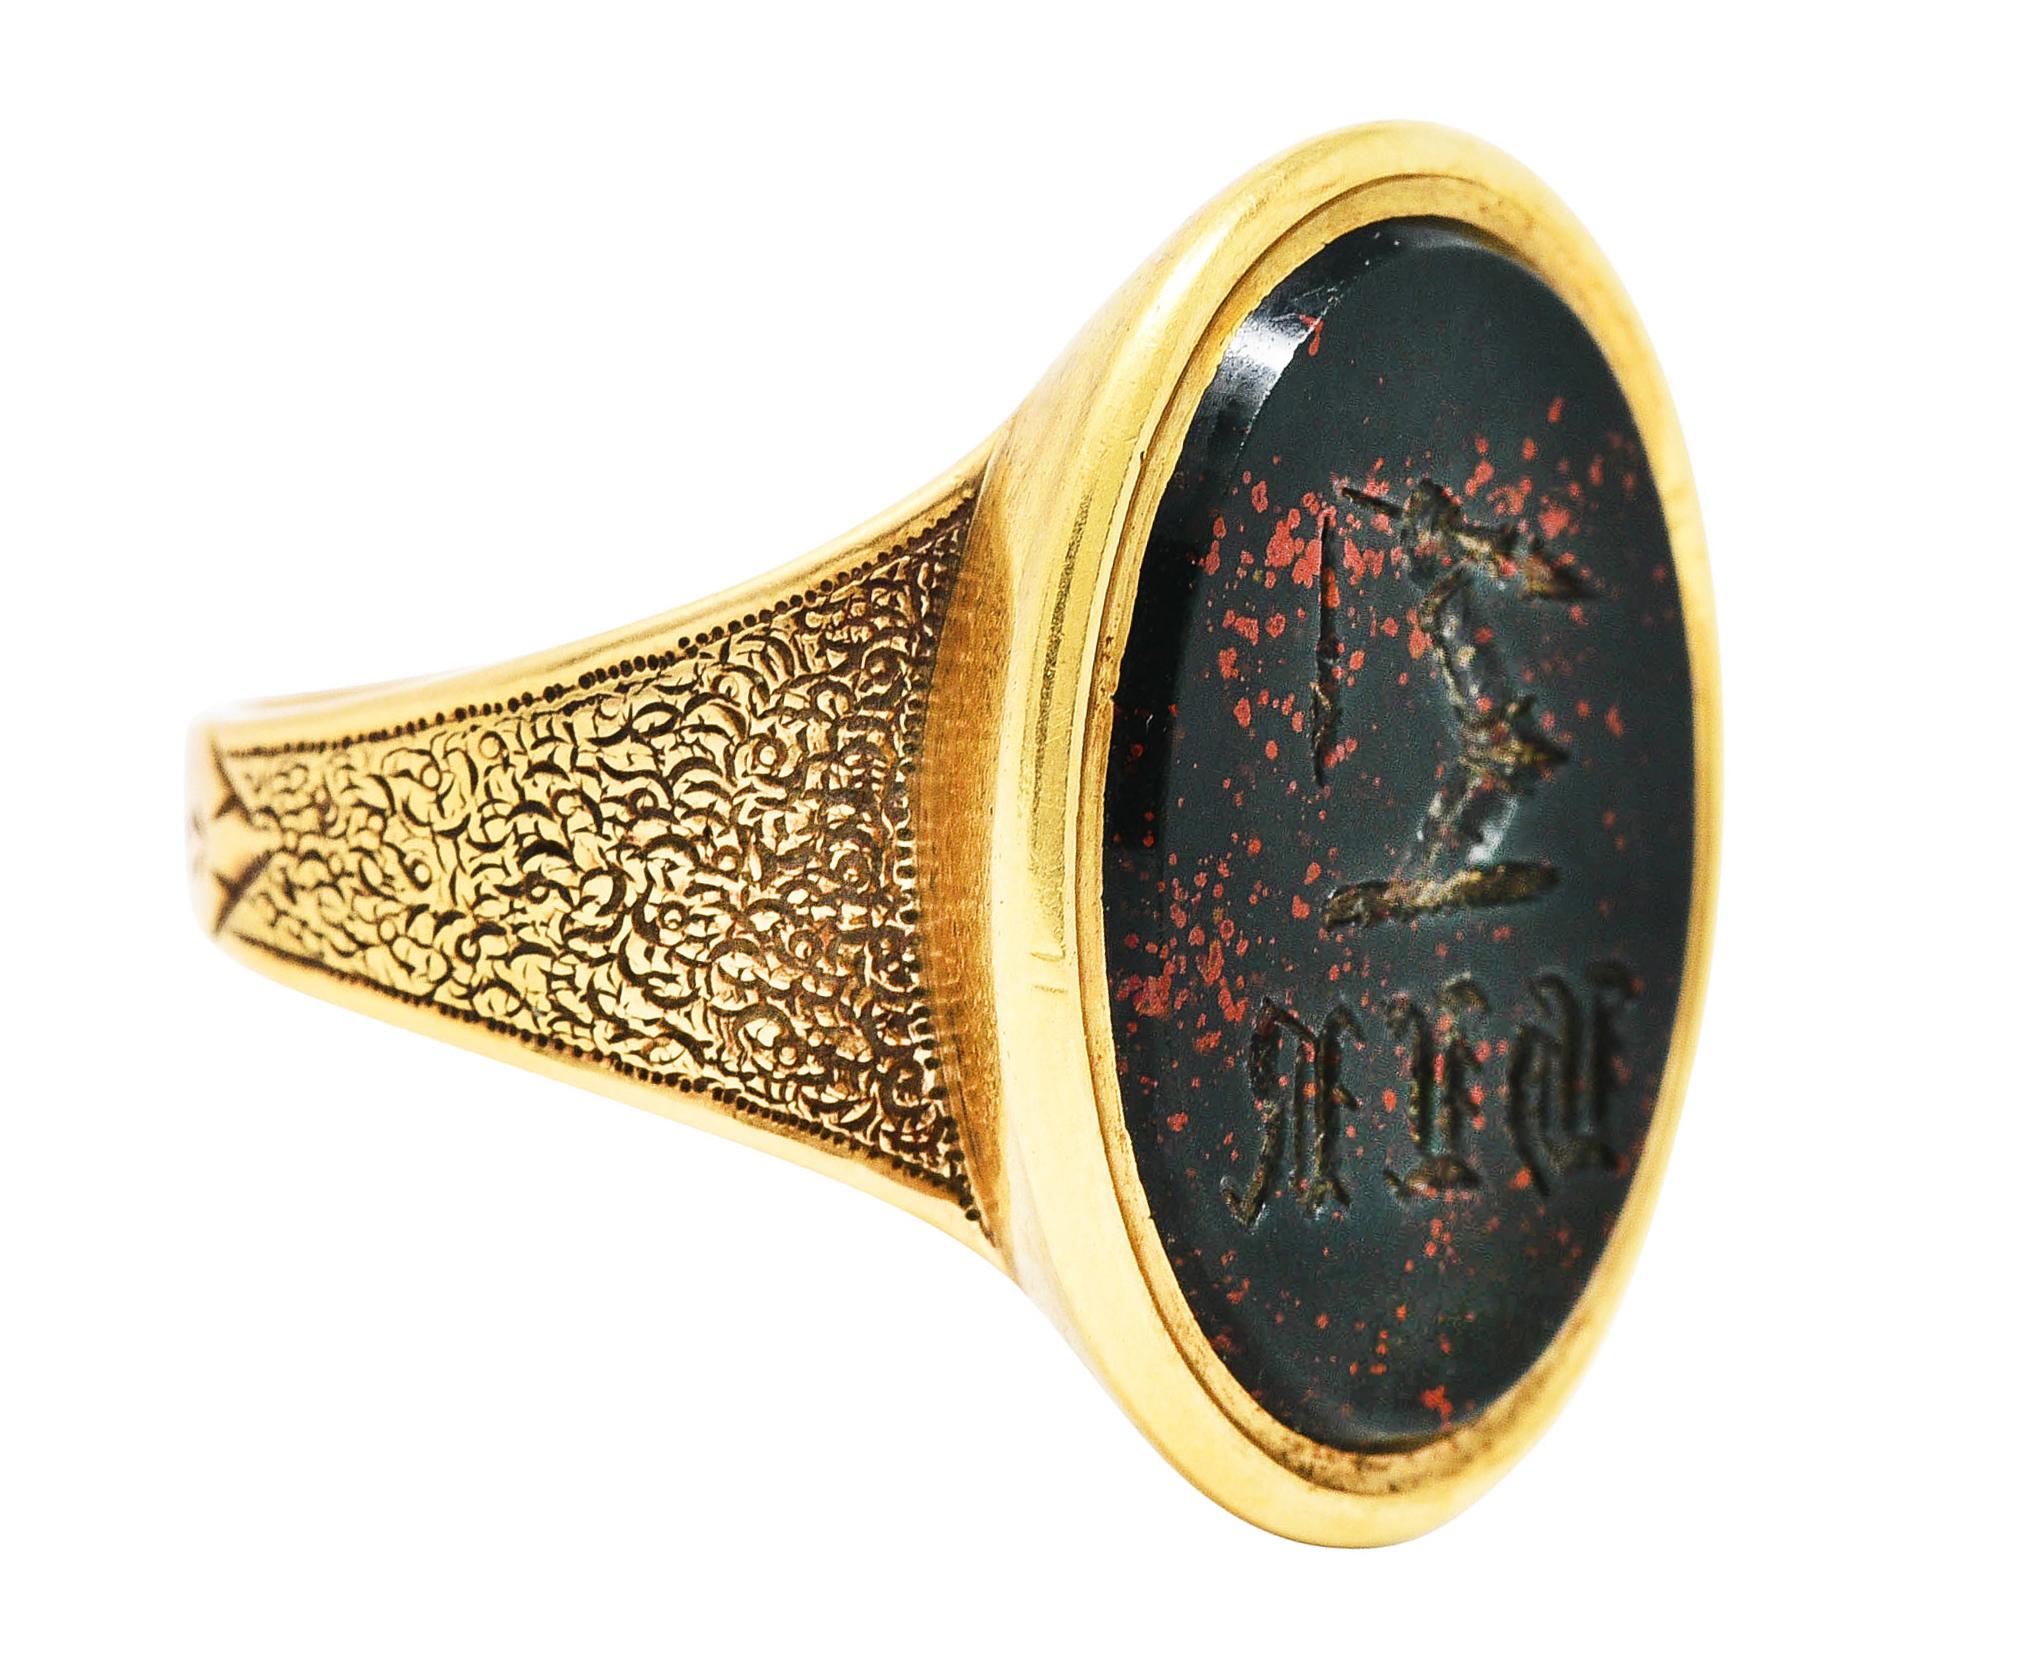 Signet style ring designed with oval face and stylized shoulders

Centering a bloodstone slab measuring 20.5 x 15.5 mm

Bloodstone is opaque bluish green with strong red mottling

Signet features intaglio of armored hand holding broken spear with